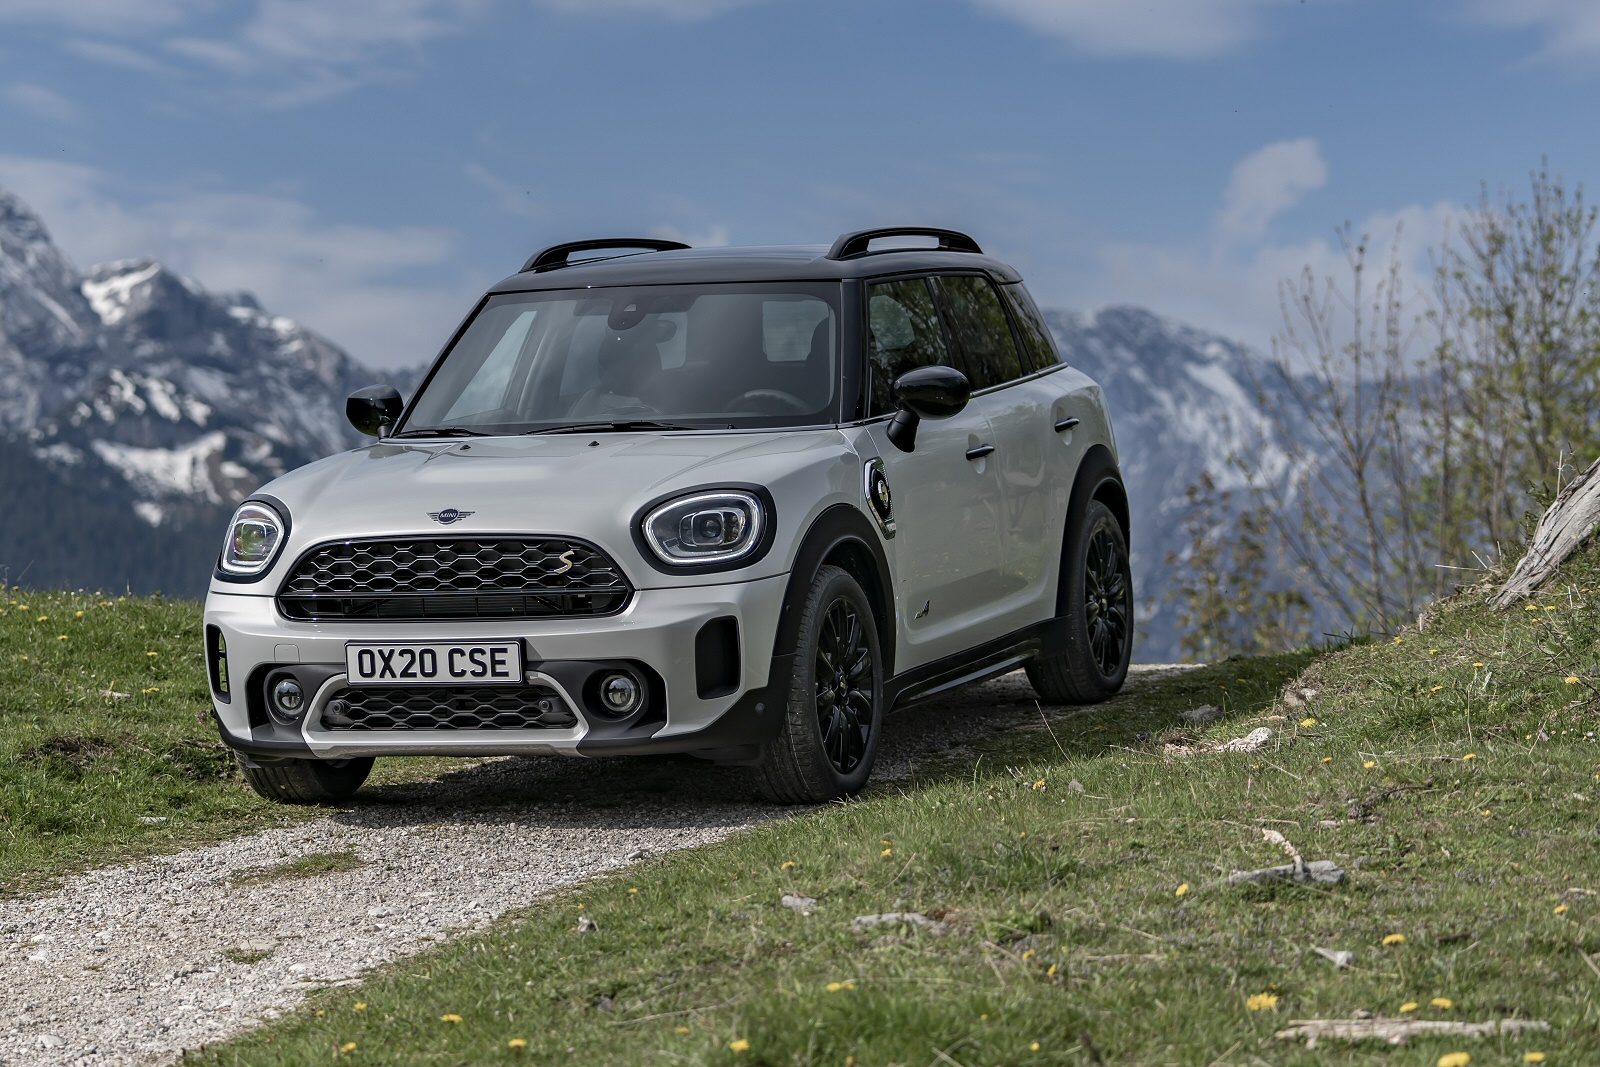 MINI COUNTRYMAN HATCHBACK 2.0 Cooper S Sport ALL4 5dr Auto [Comfort Pack]